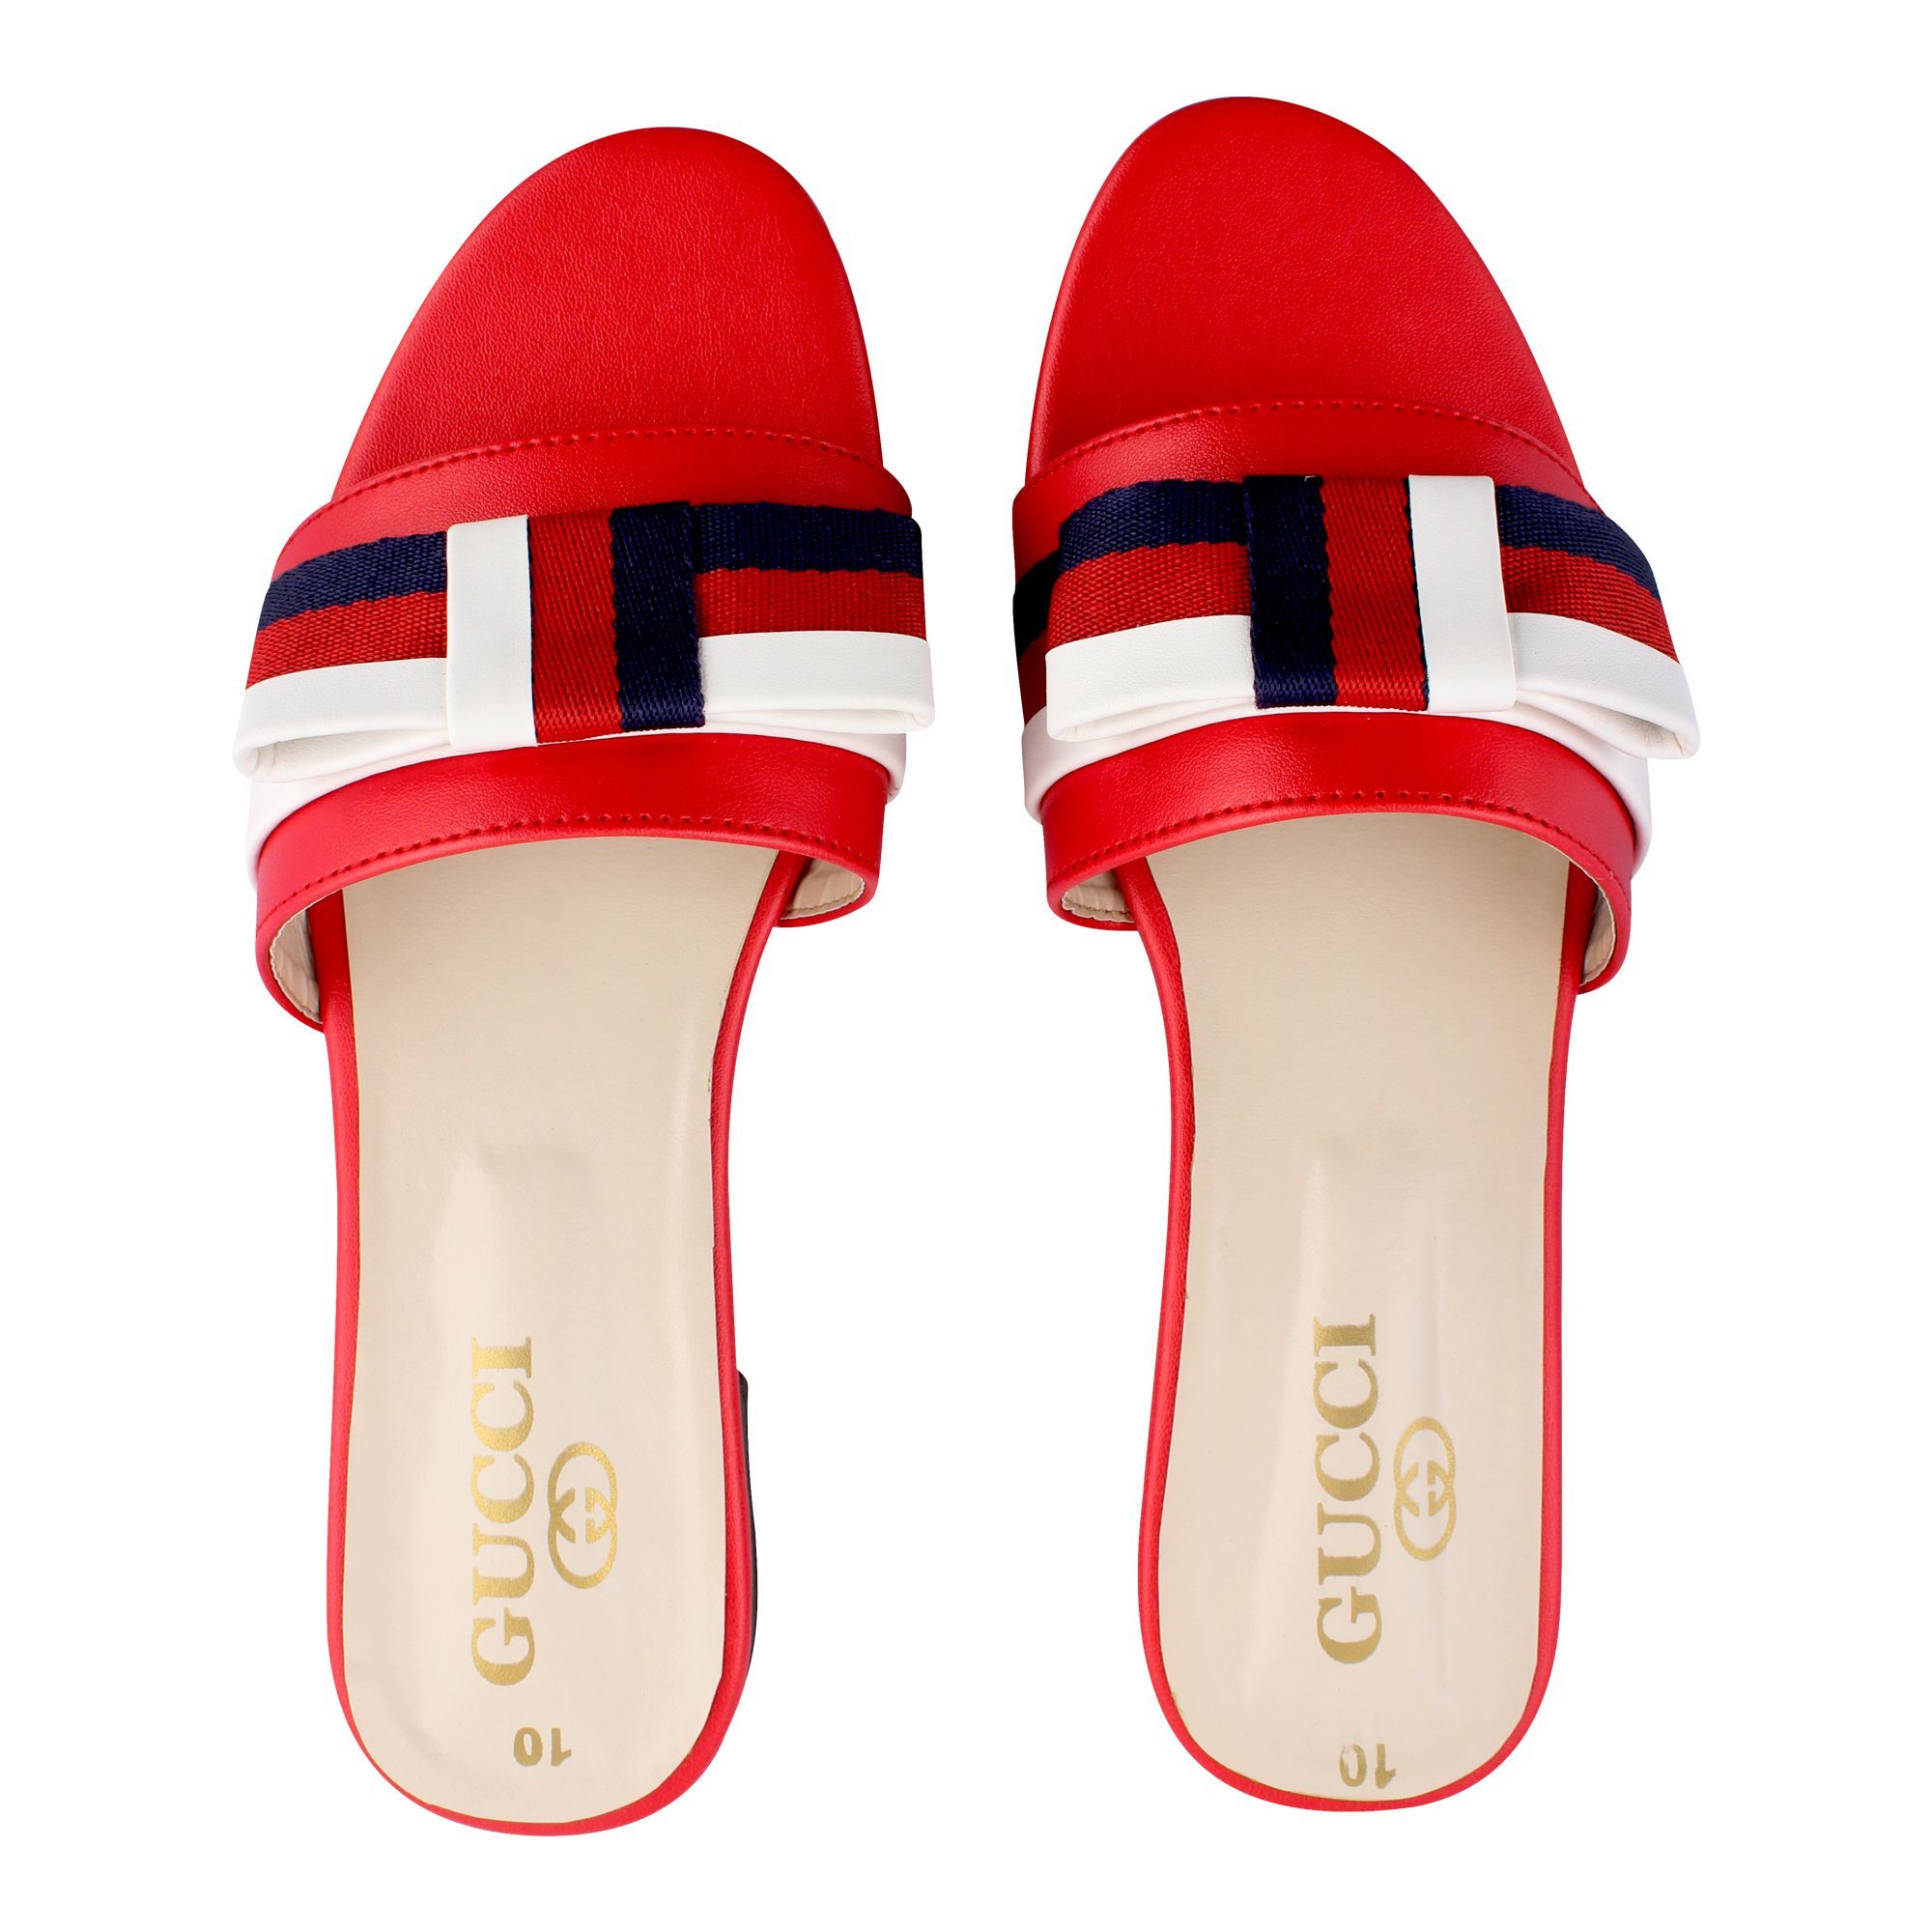 Kontrovers Windswept krig Buy Gucci Style Women's Slippers, Red Online at Best Price in Pakistan -  Naheed.pk